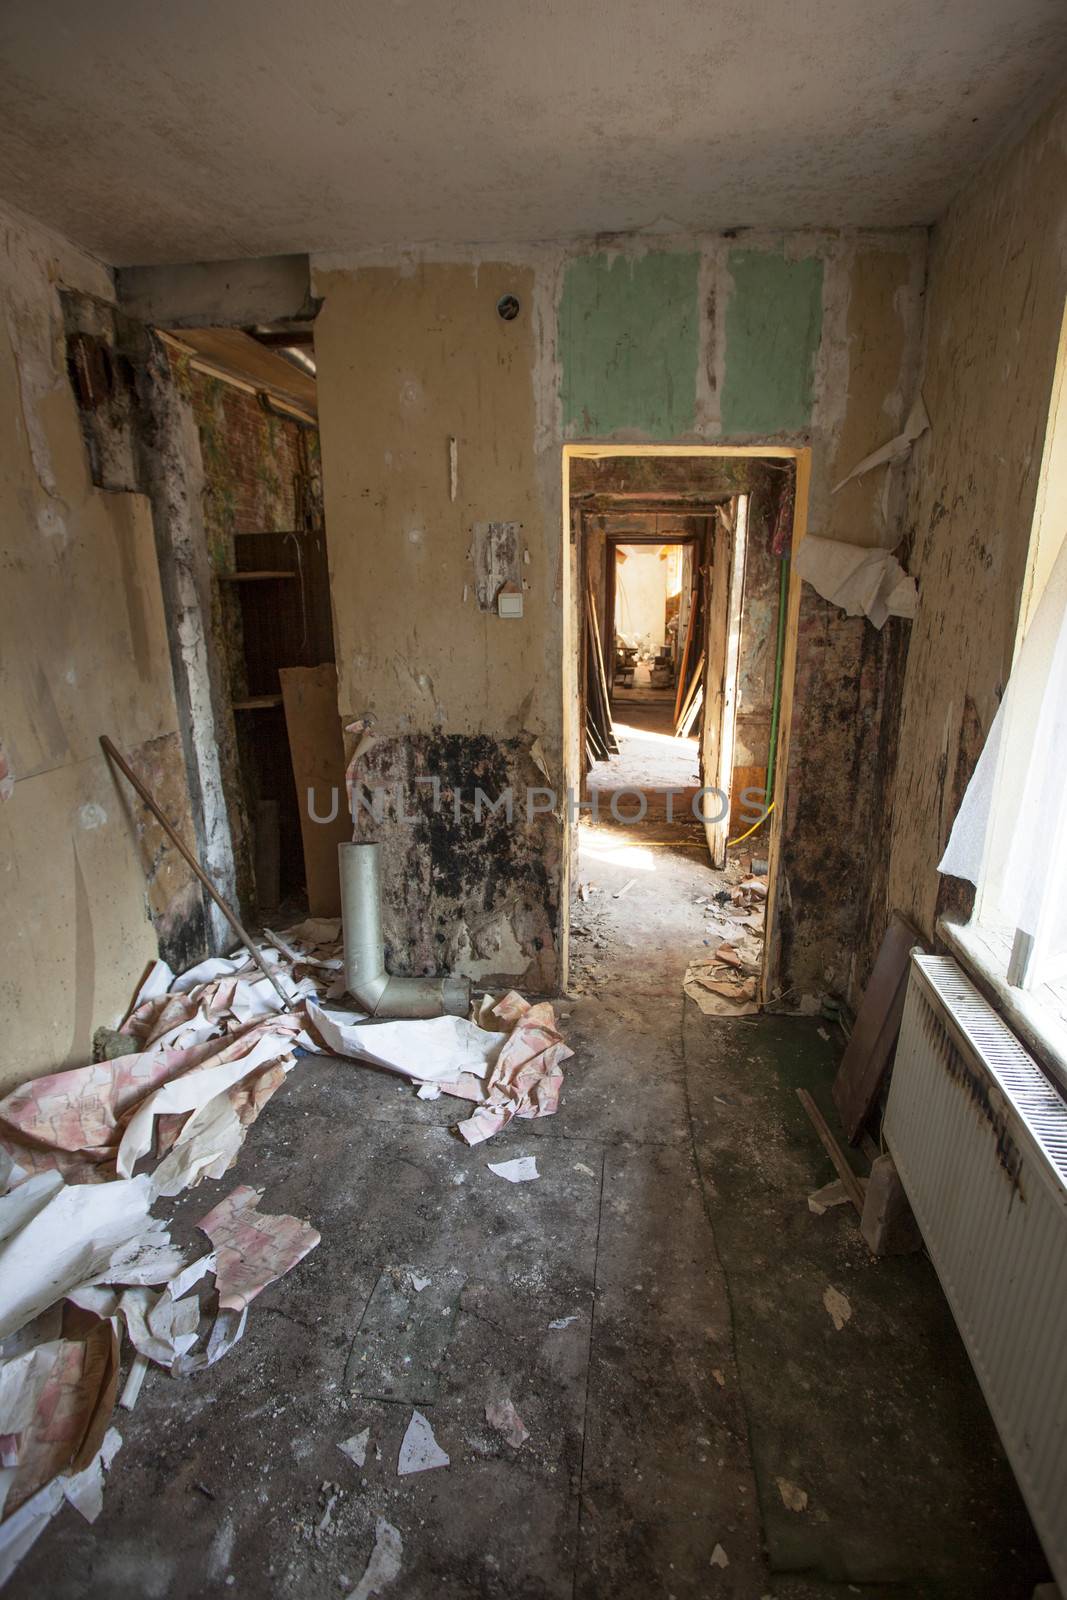 Interior of an old abandoned and rundown apartment